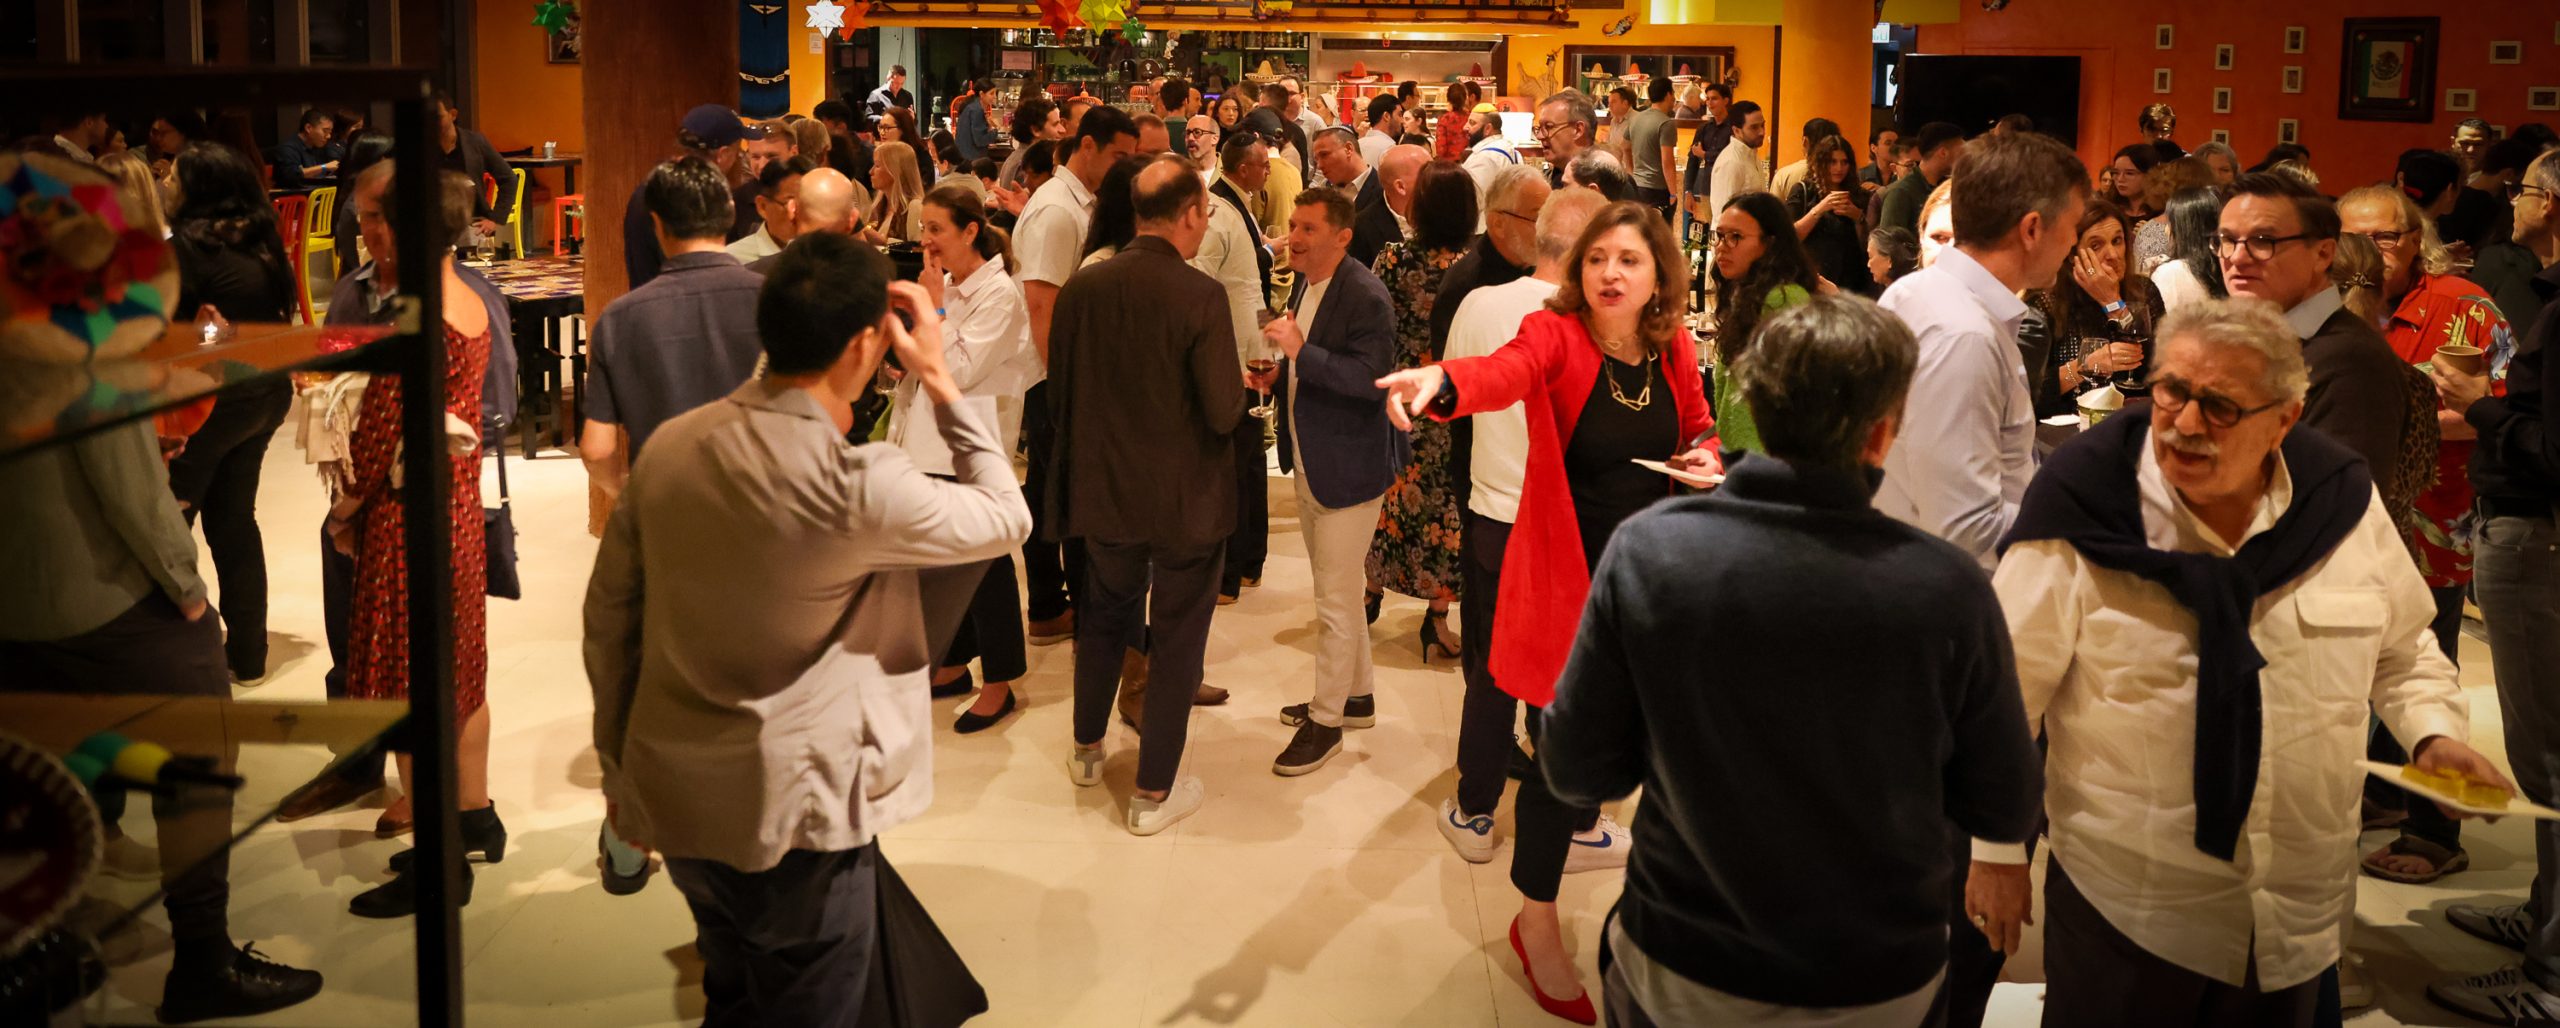 HKJFF After Buffet - Opening Night - photo © Magnificent by Tal Shahar